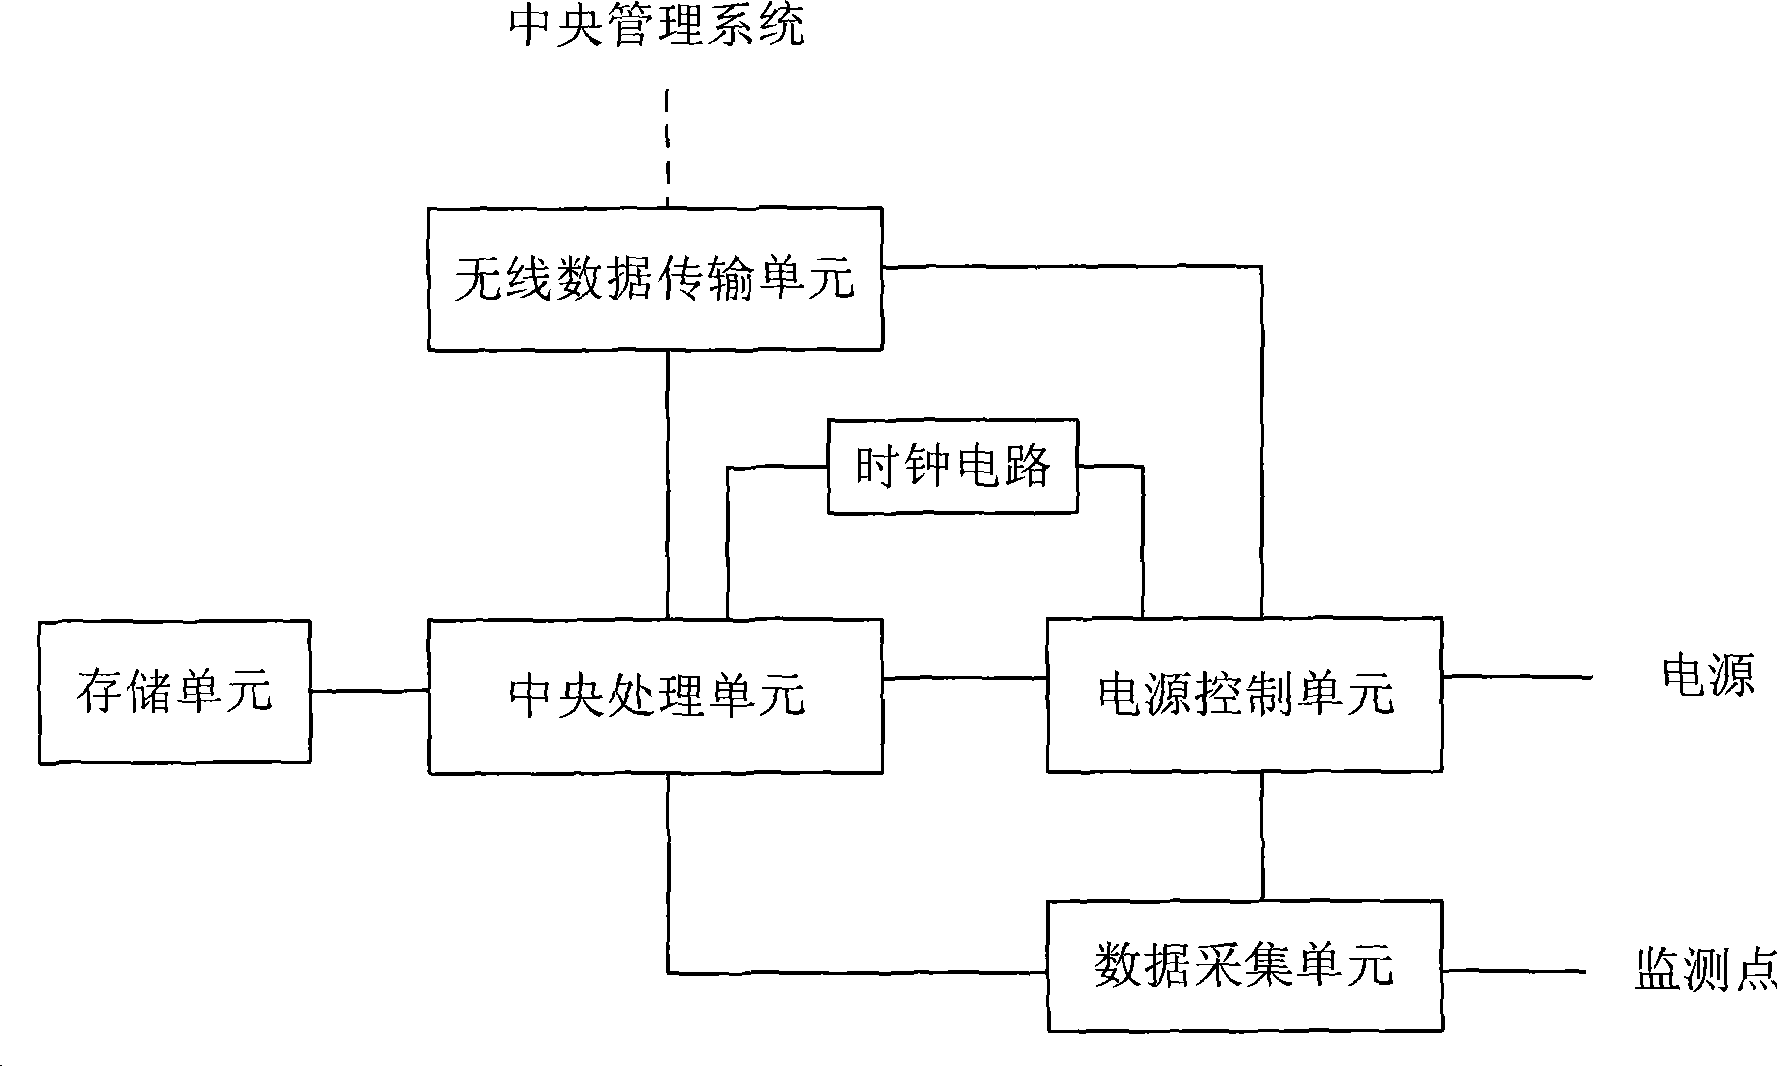 Data acquisition and monitor control system terminal acquisition equipment